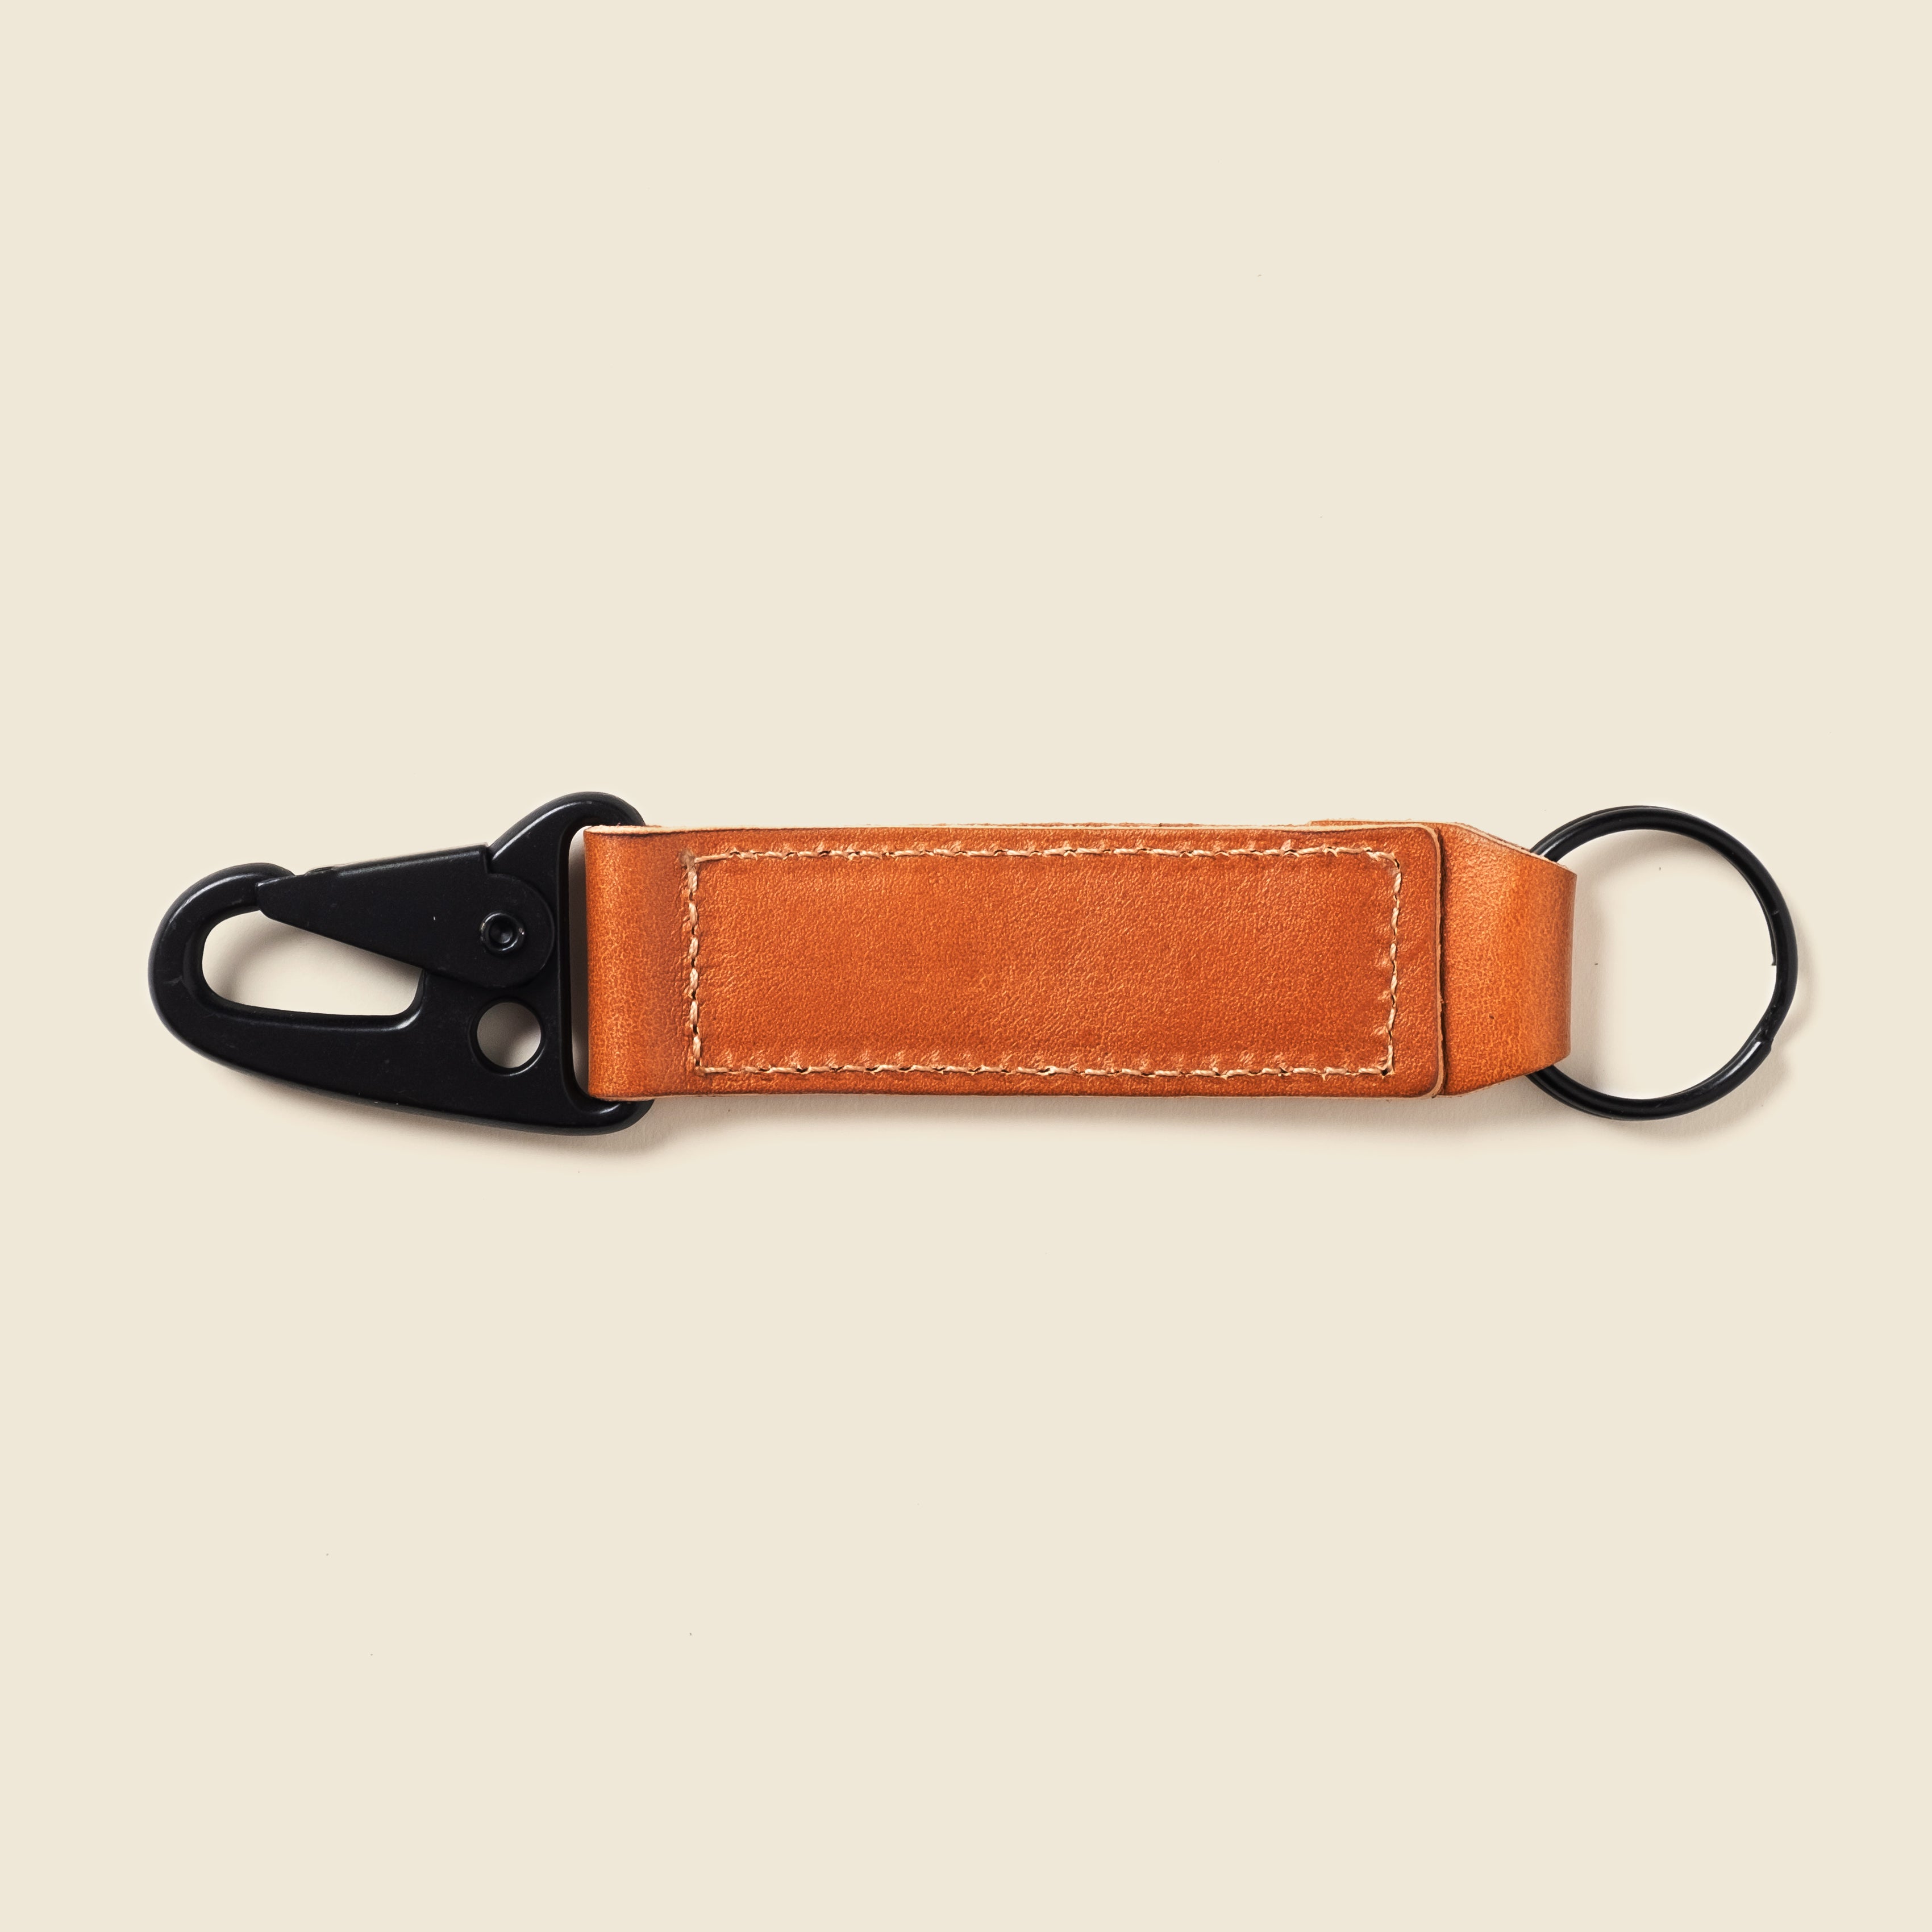 sustainable leather keychain by Casupo